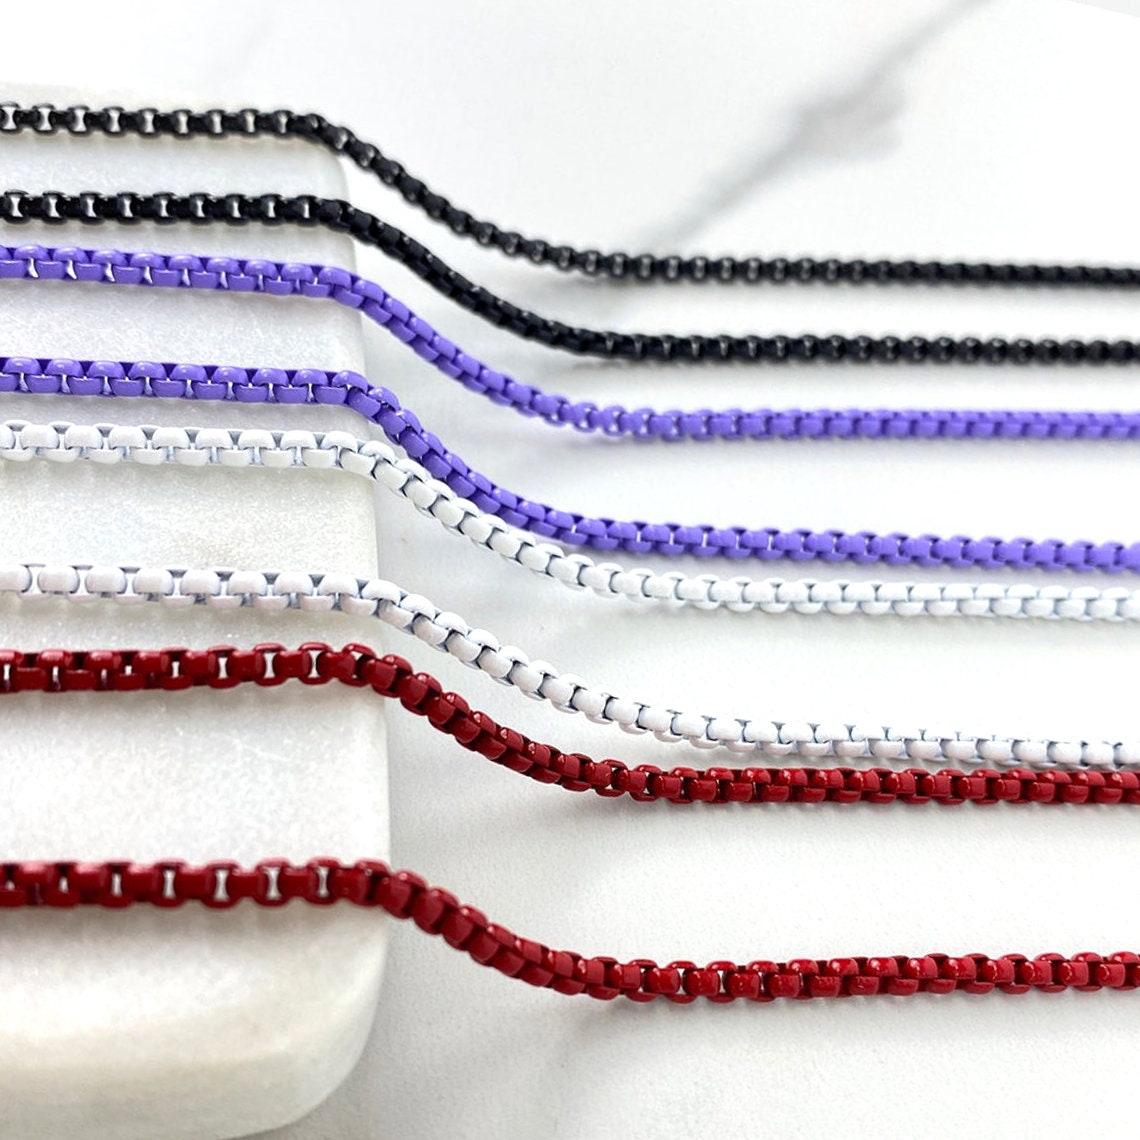 18k Gold Filled 3mm Colorful Enamel Box Chain Multicolor Necklace For Jewelry Making Supplies, Craft Jewelry Wholesale